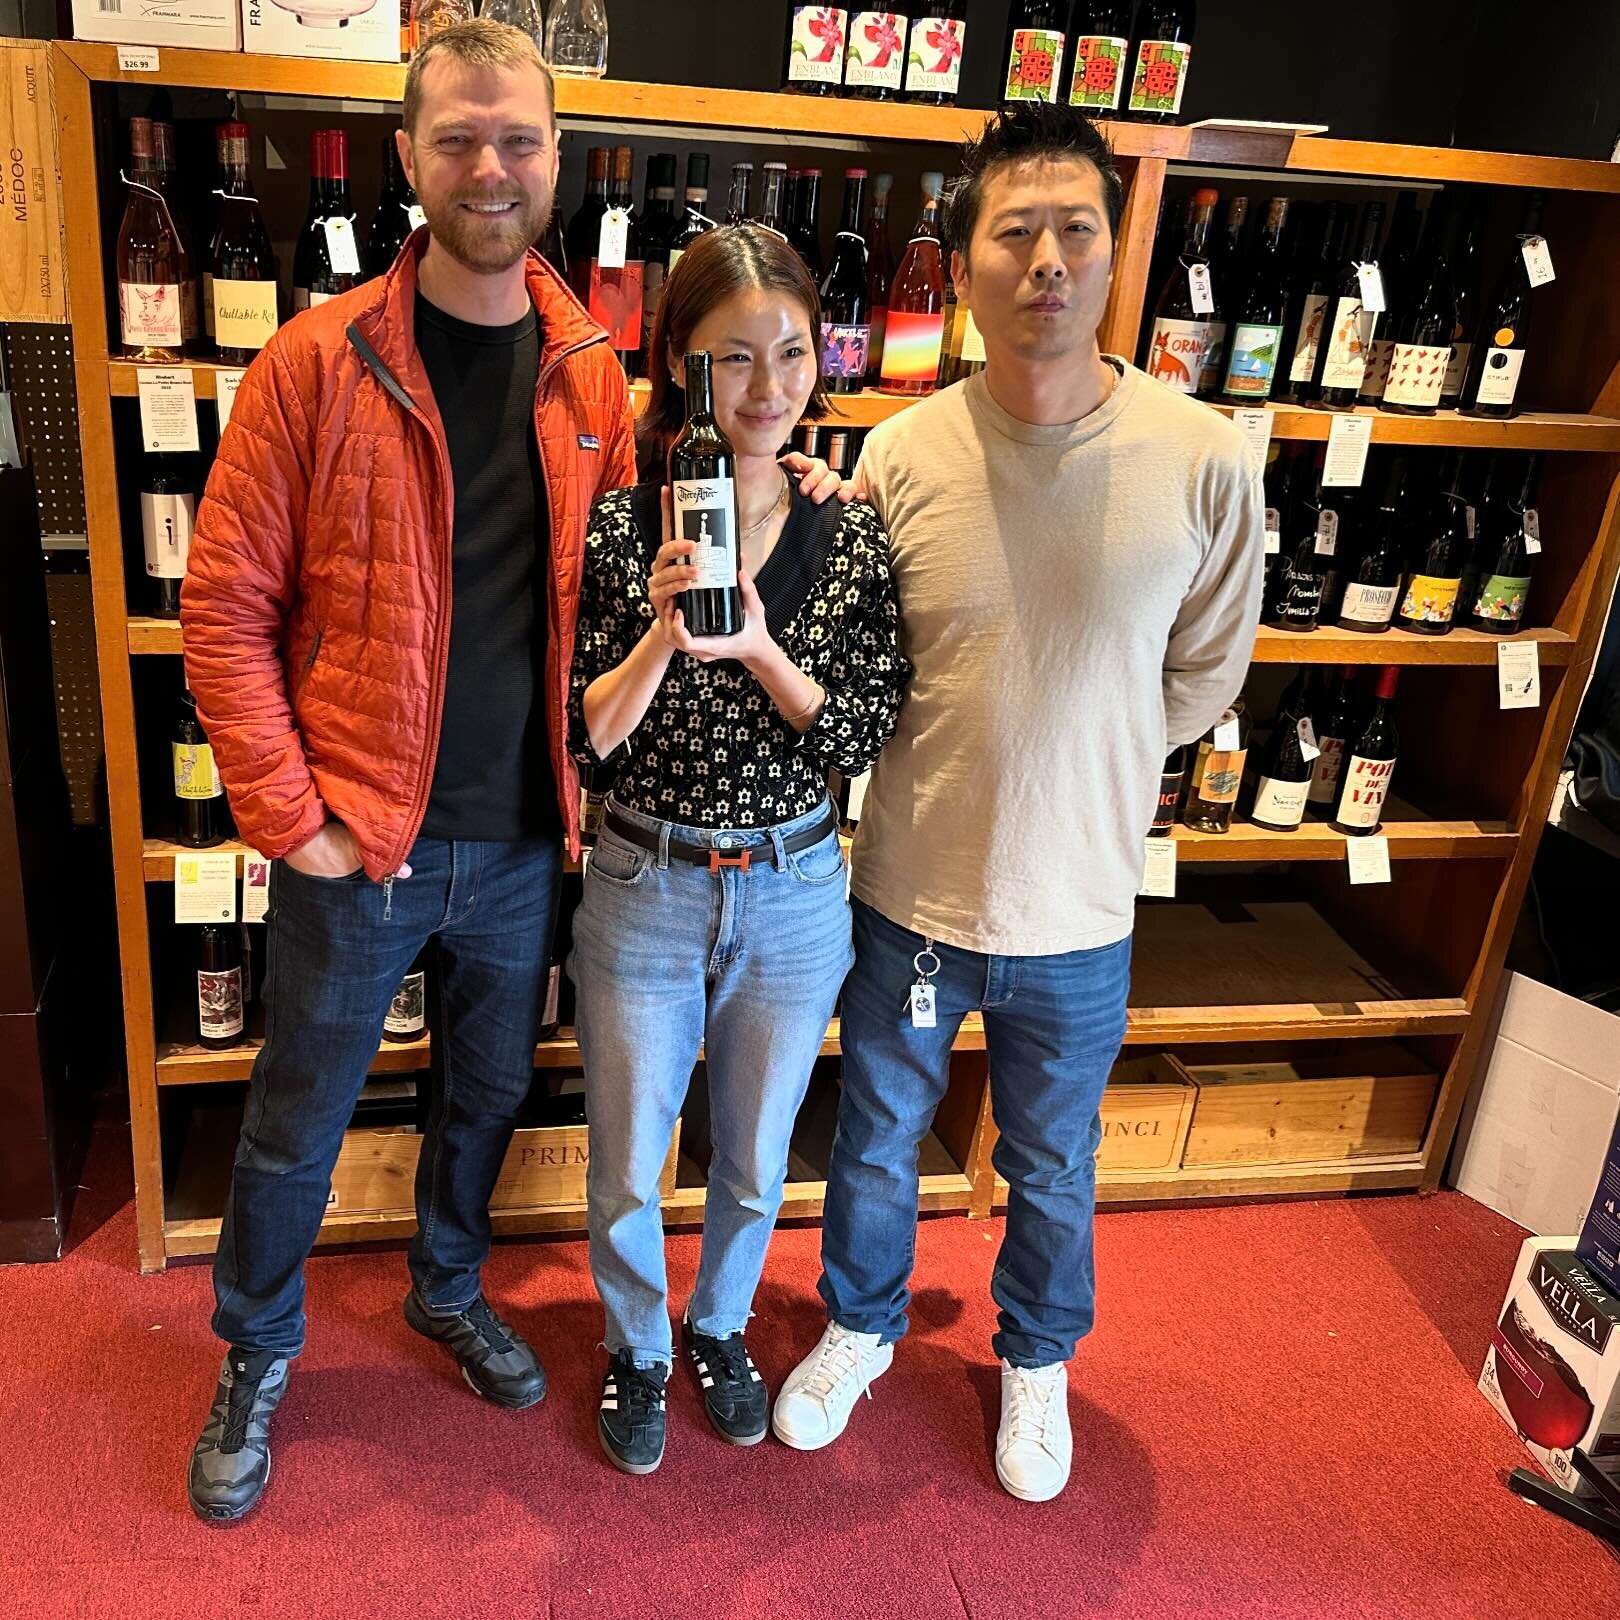 📝Field Notes: New Jersey is waking up to vineyard-focused, minimal intervention wine 👀 Haley and Joe at Manor in Leonia are building a strong community around organic wine with purpose. Kudos, guys! It was a pleasure to taste with you.

You can now